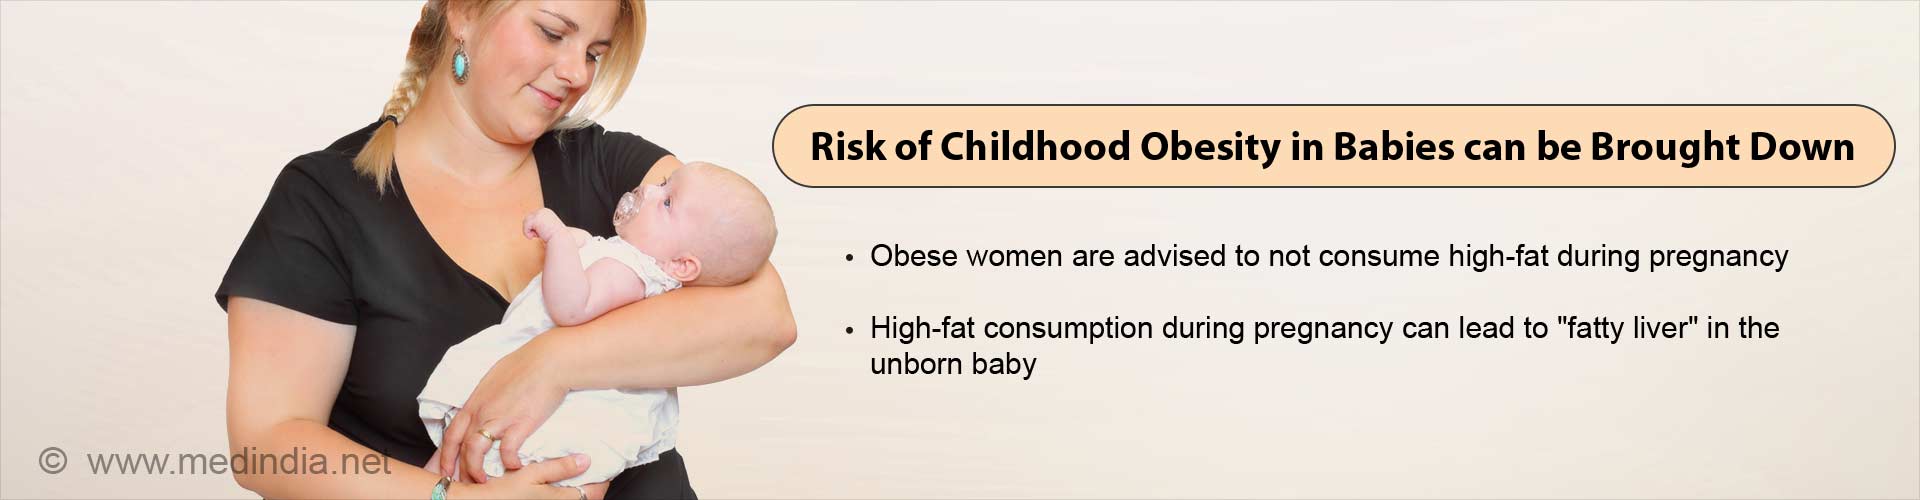 risk of childhood obesity in babies can be brought down
- obese women are advise to not consume high-fat during pregnancy
- high-fat consumption during pregnancy can lead to 